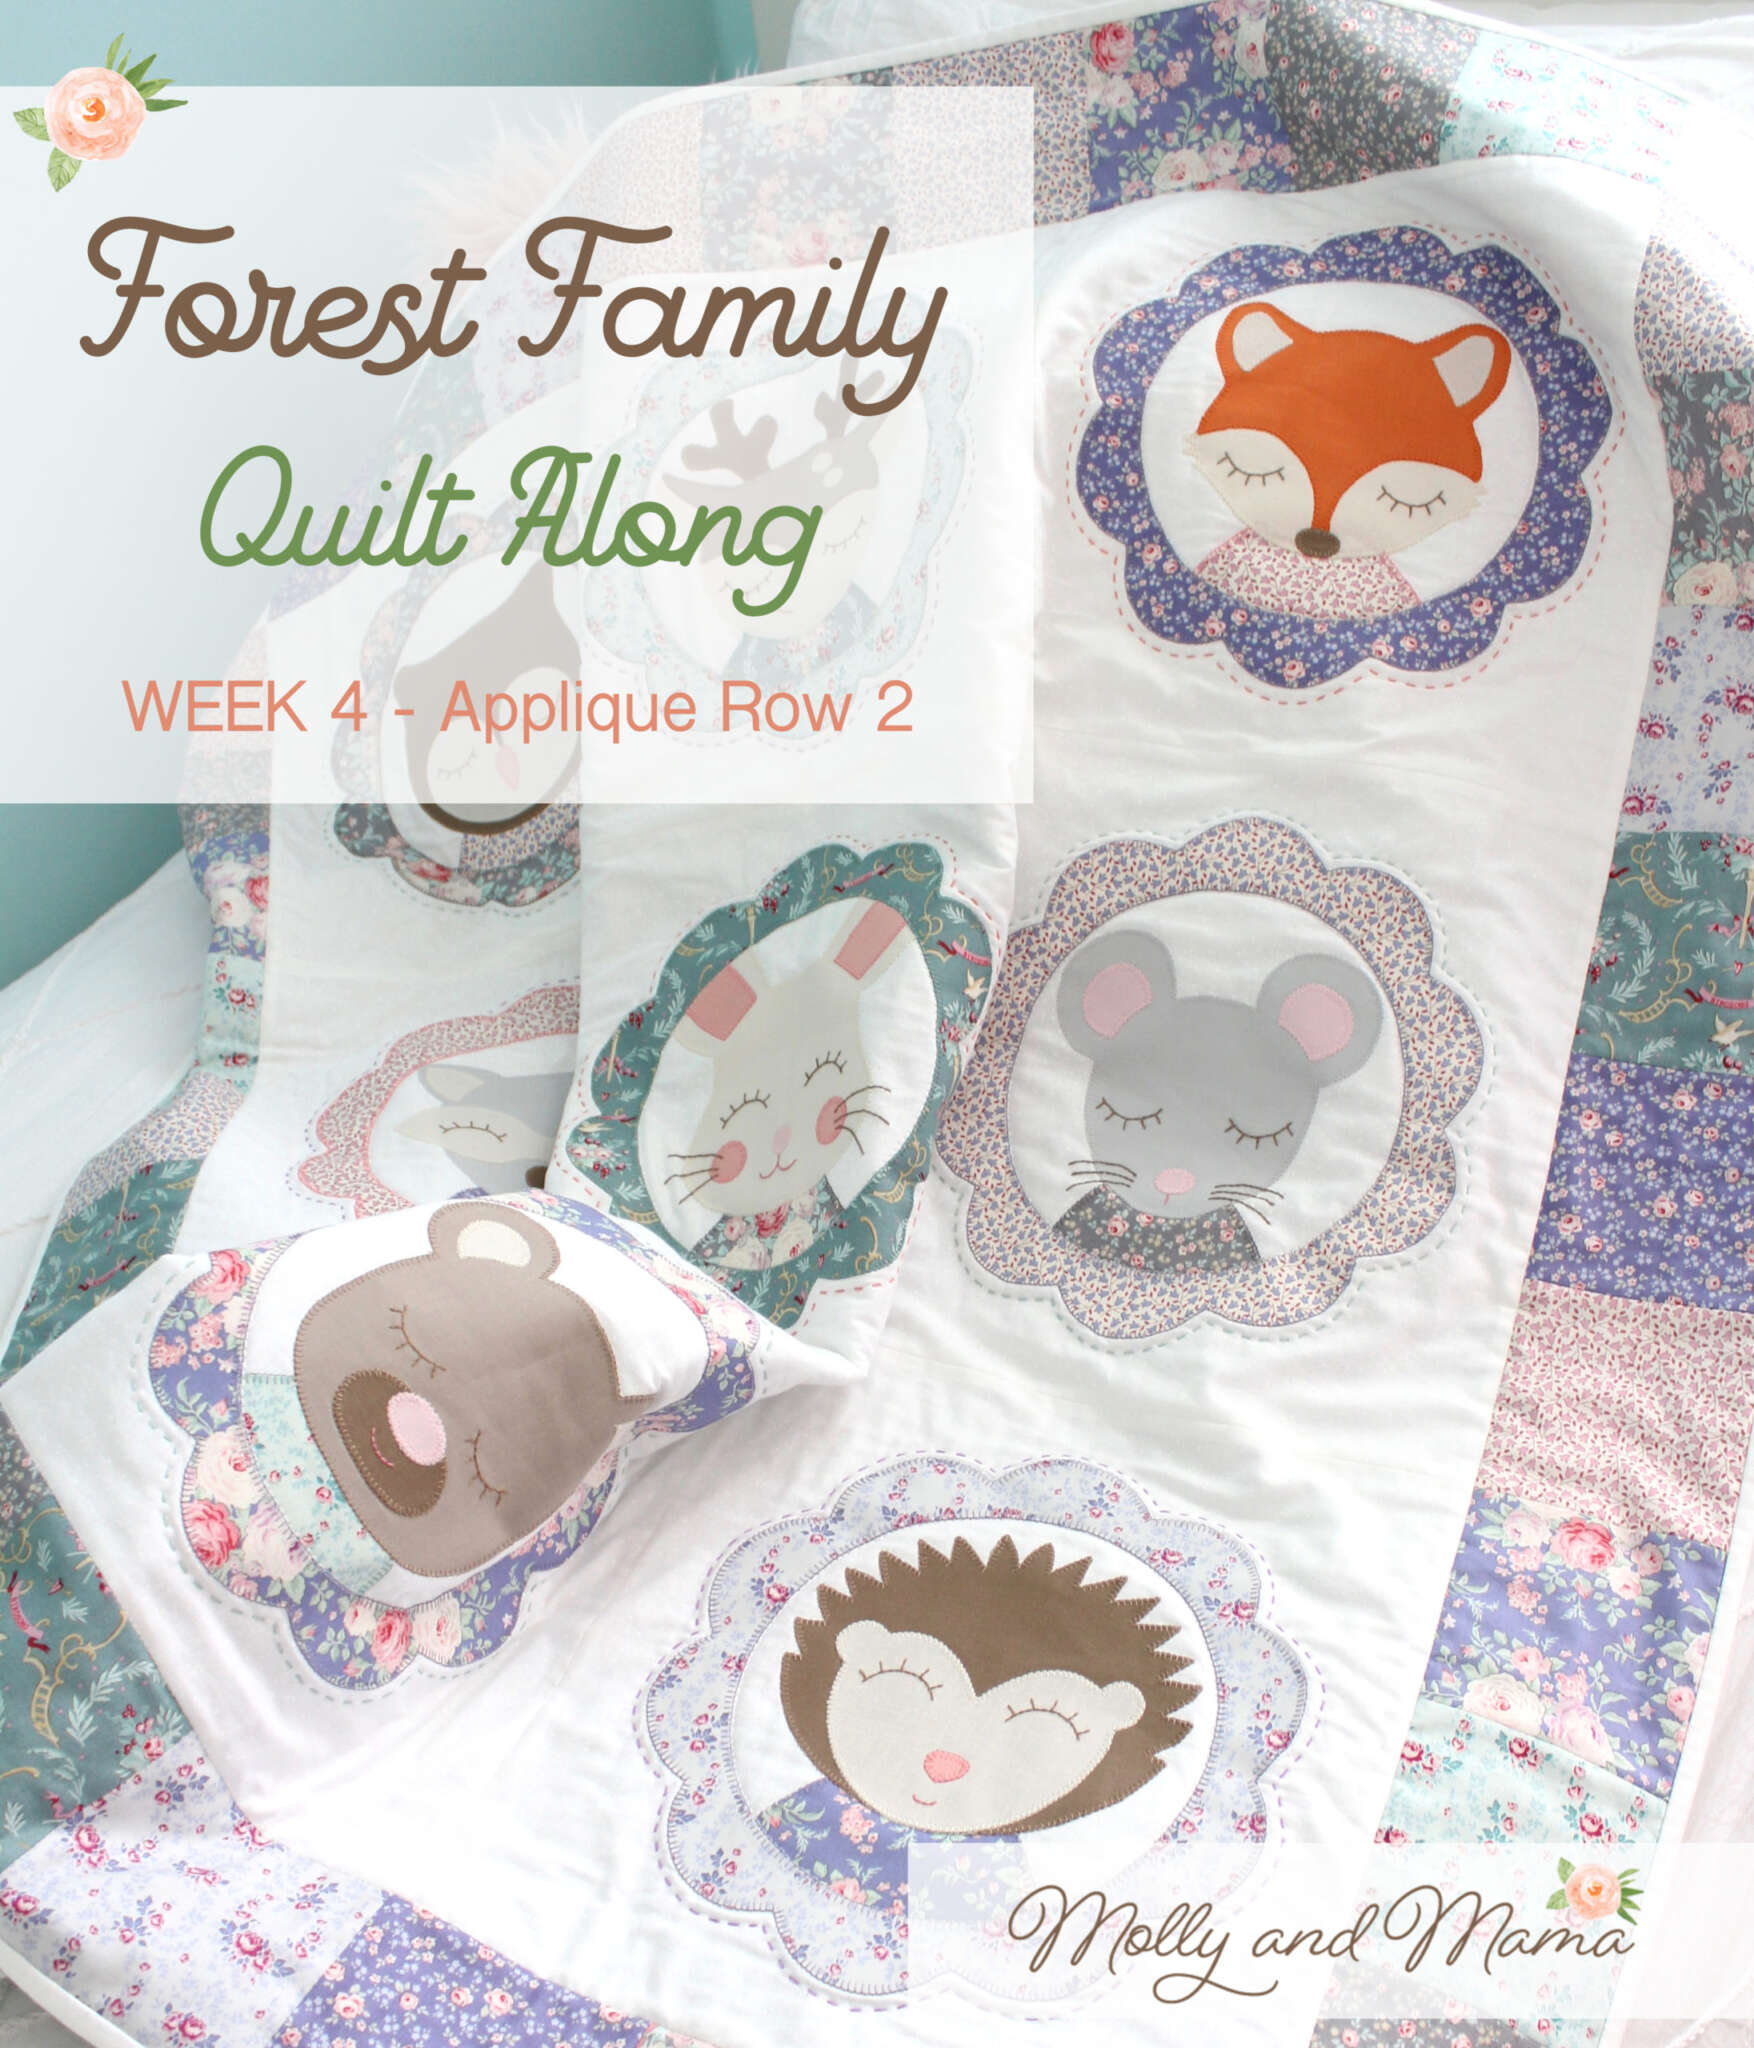 Week 4 – Forest Family Quilt Along